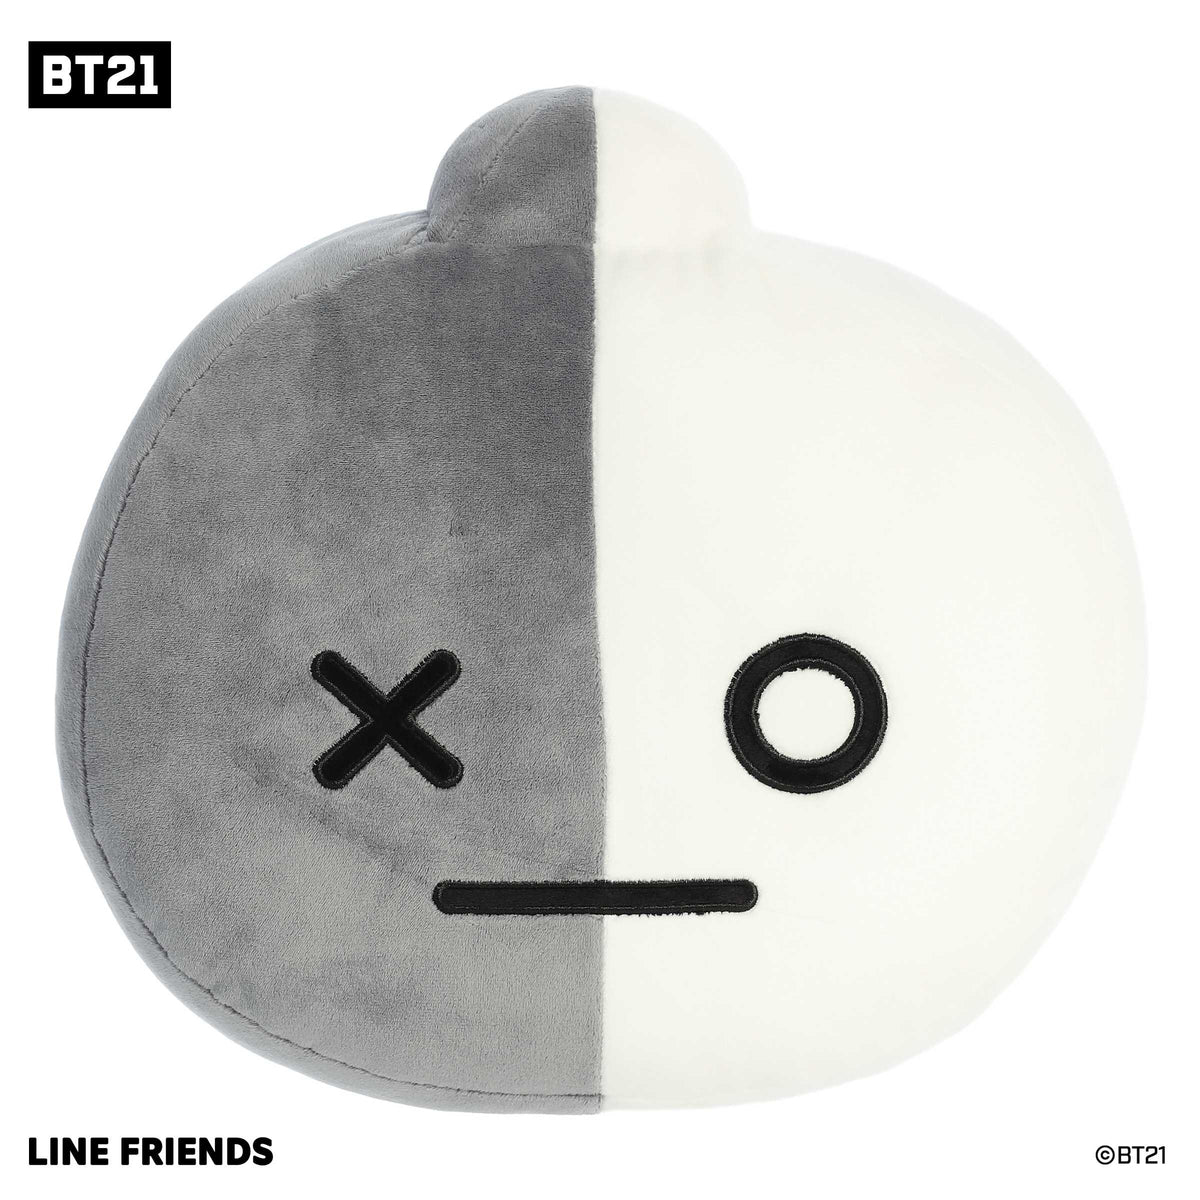 VAN Large Plush with split gray and white design, representing BT21's all-knowing robot guardian with a playful expression